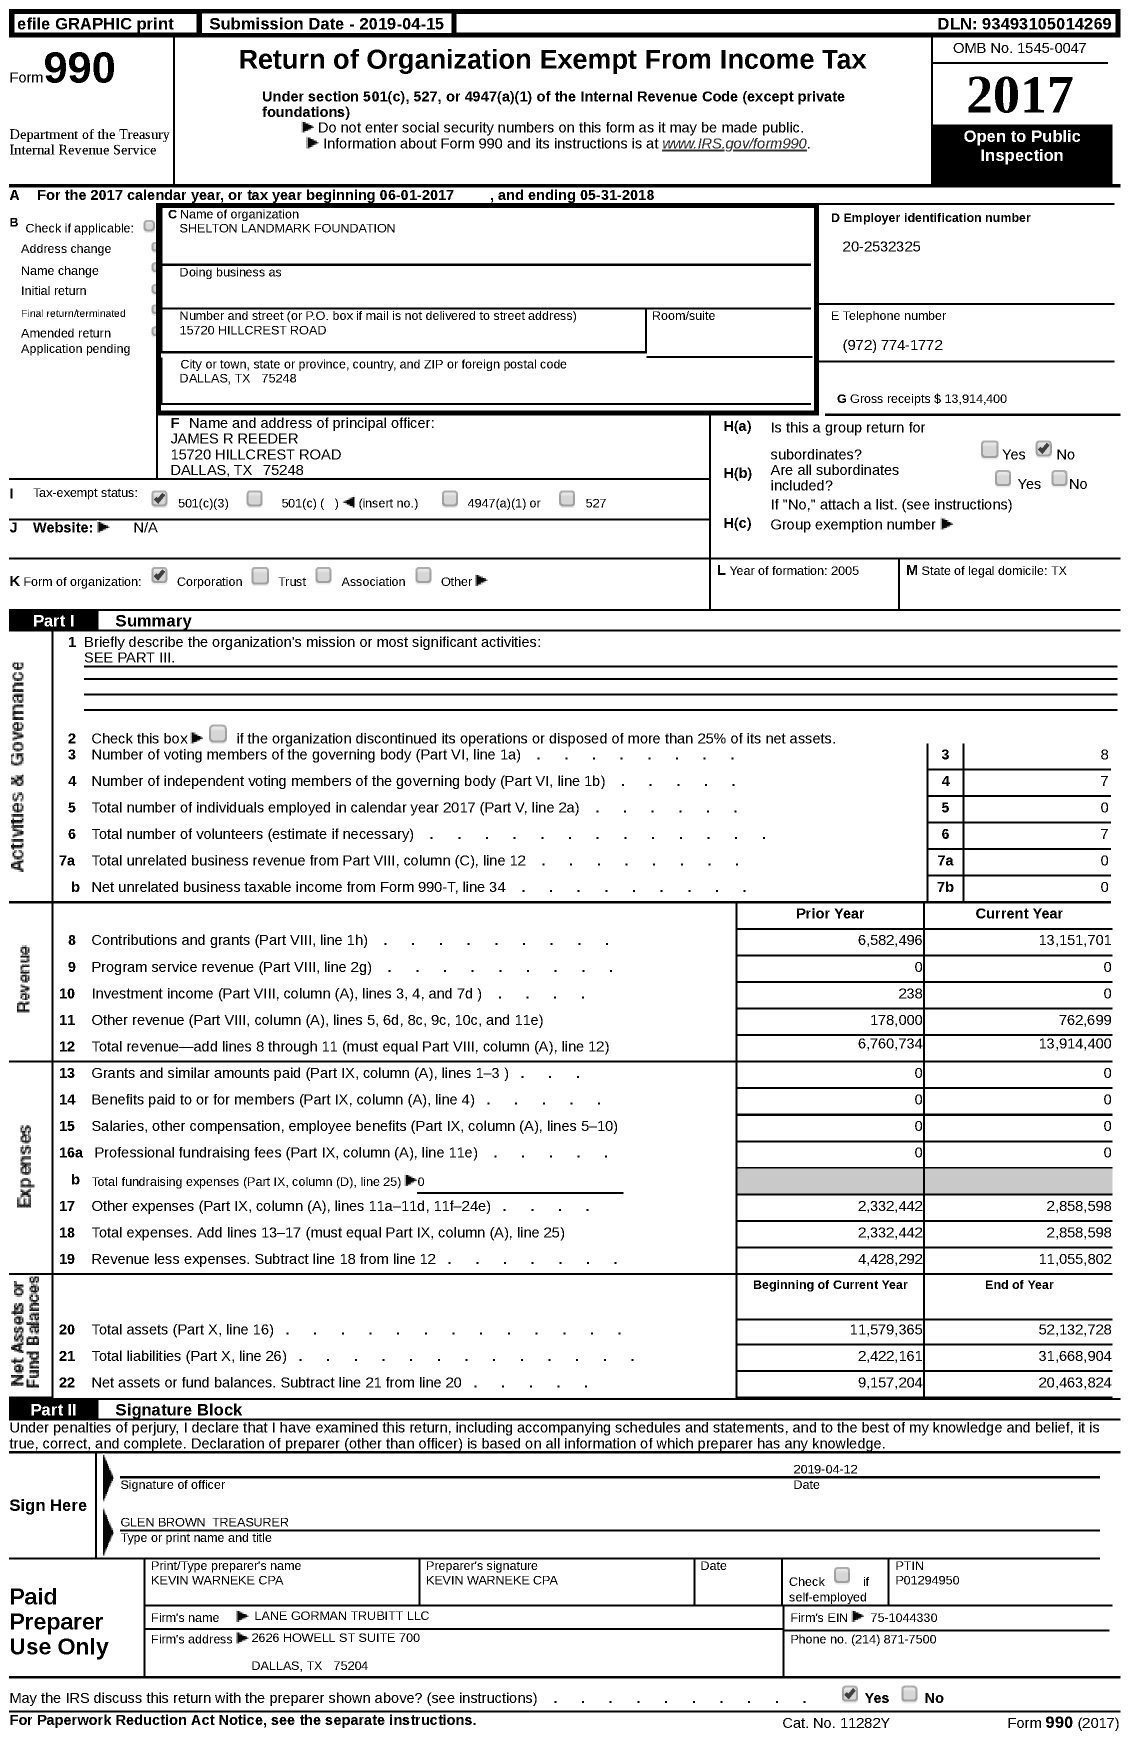 Image of first page of 2017 Form 990 for Shelton Landmark Foundation